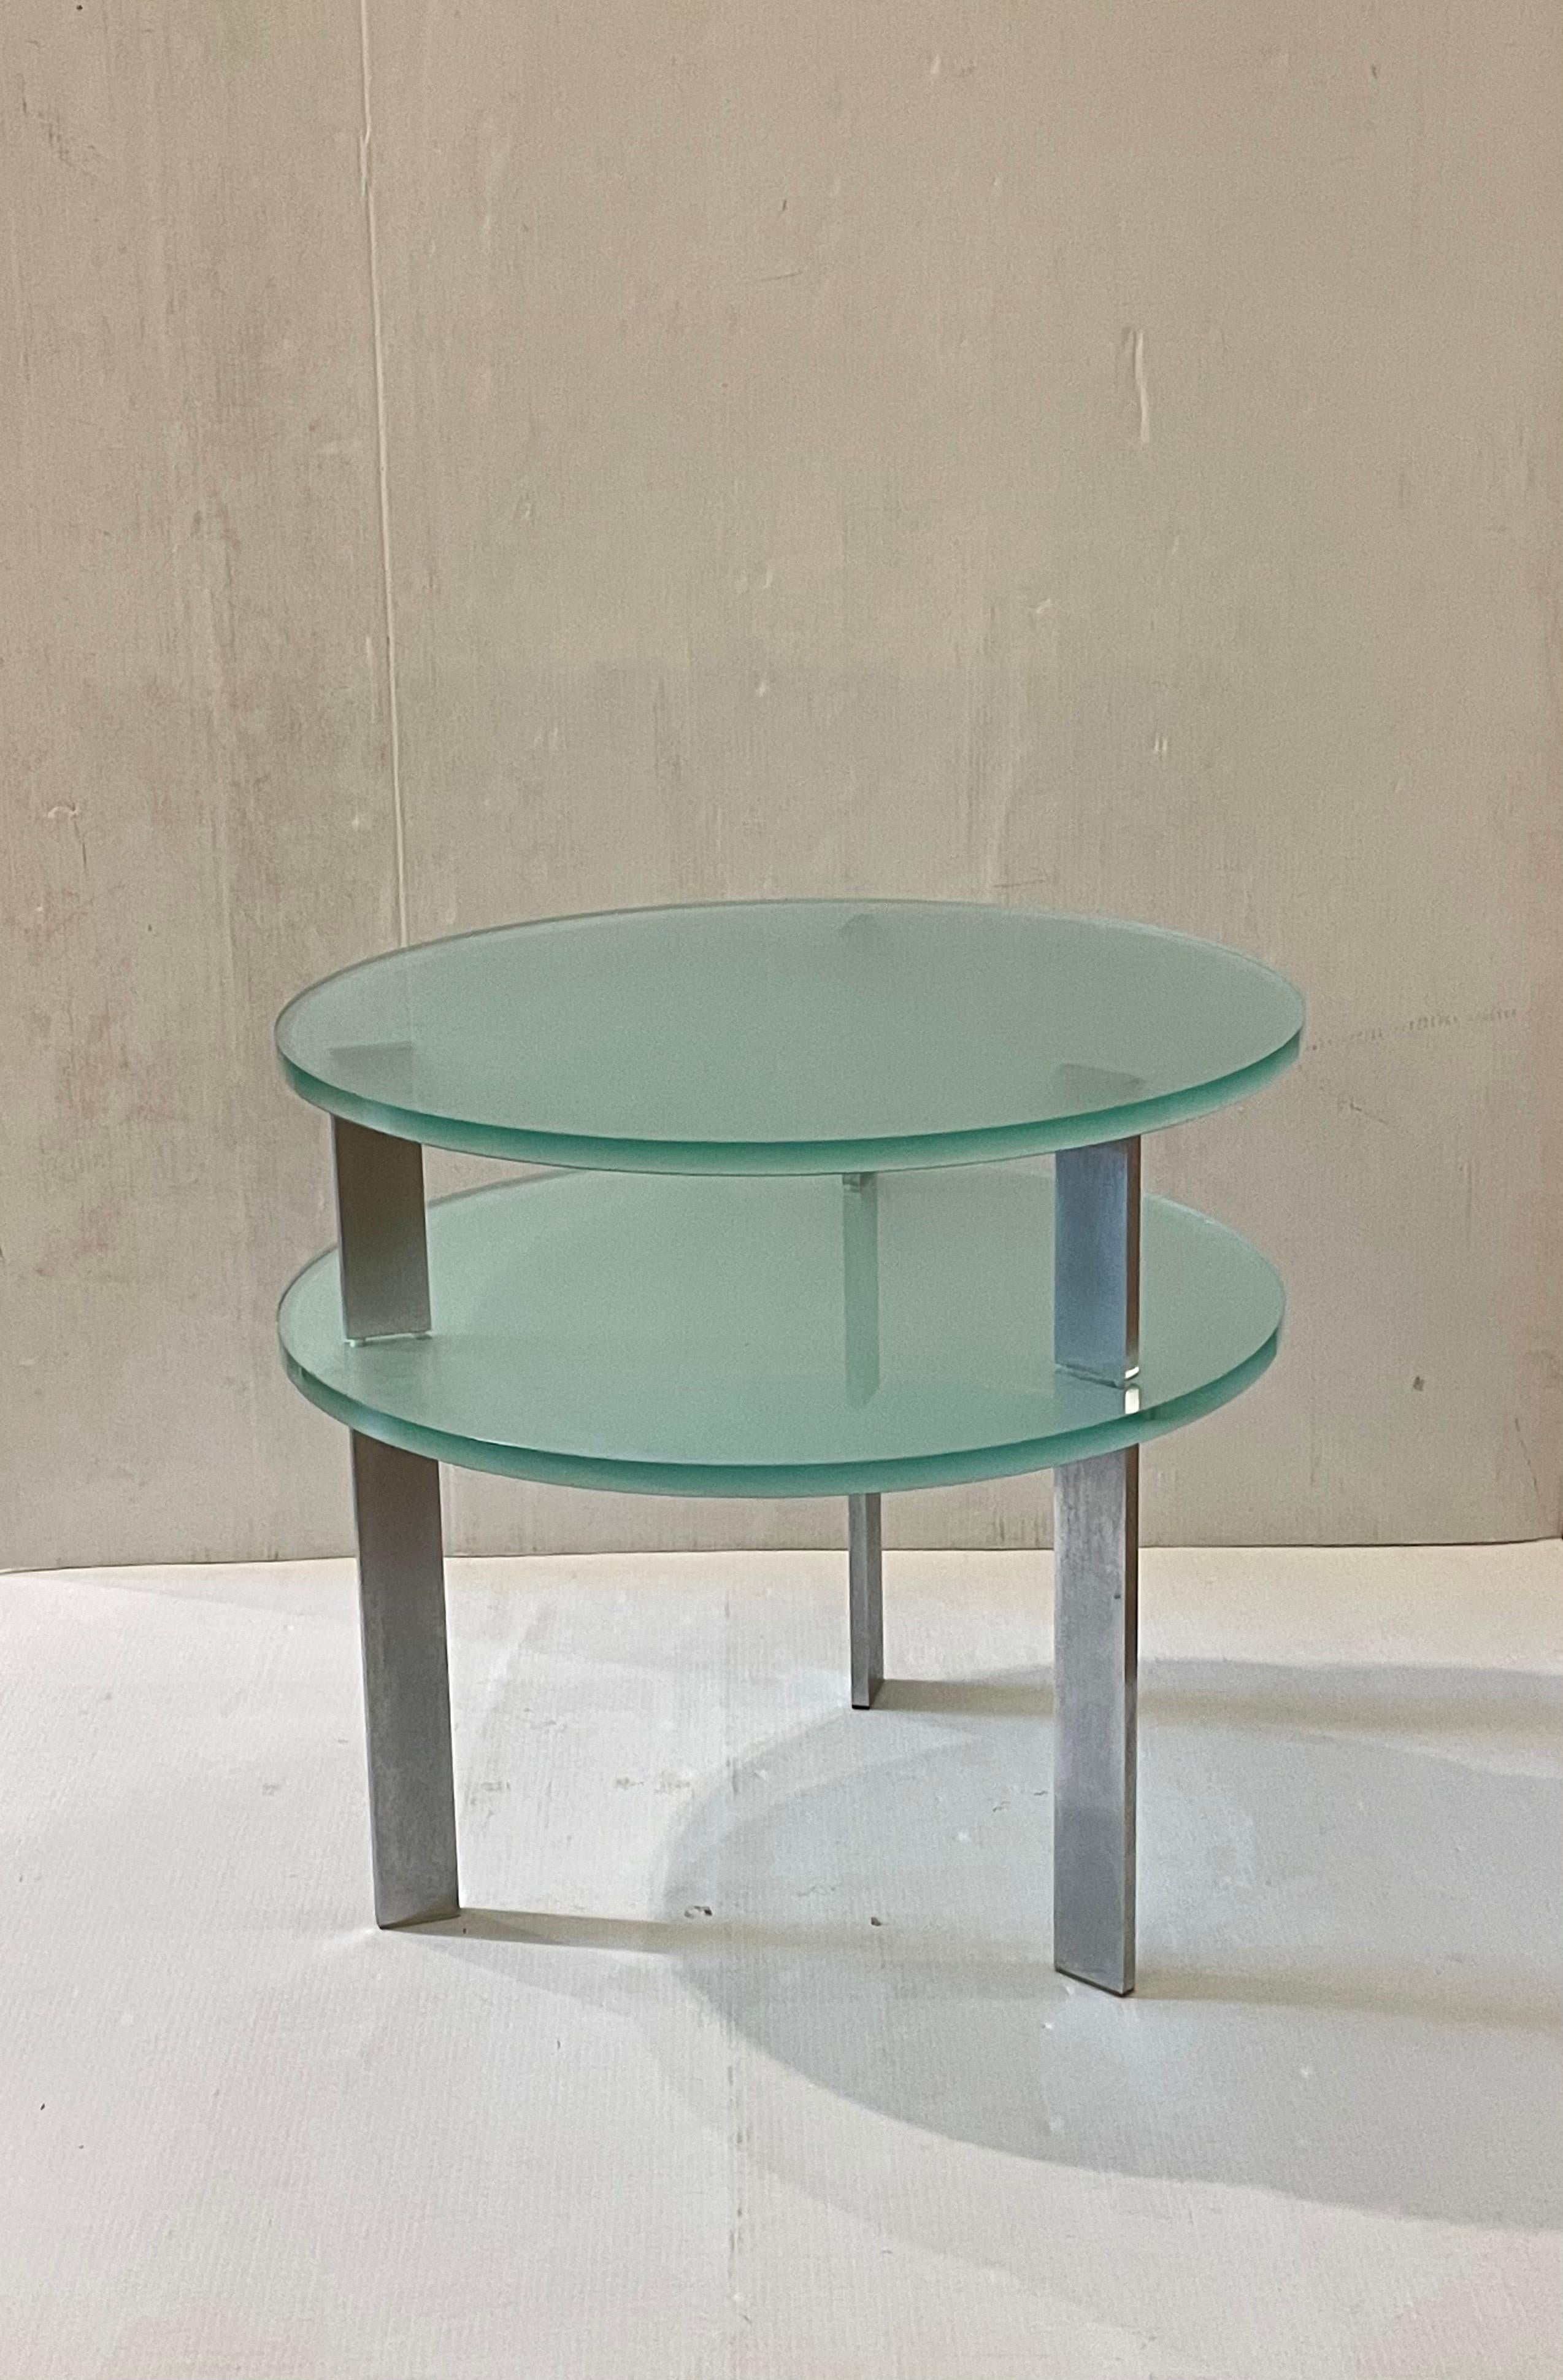 20th Century Pair of Postmodern Glass & Aluminum Legs Tables Designed by Peter Coan for Pace